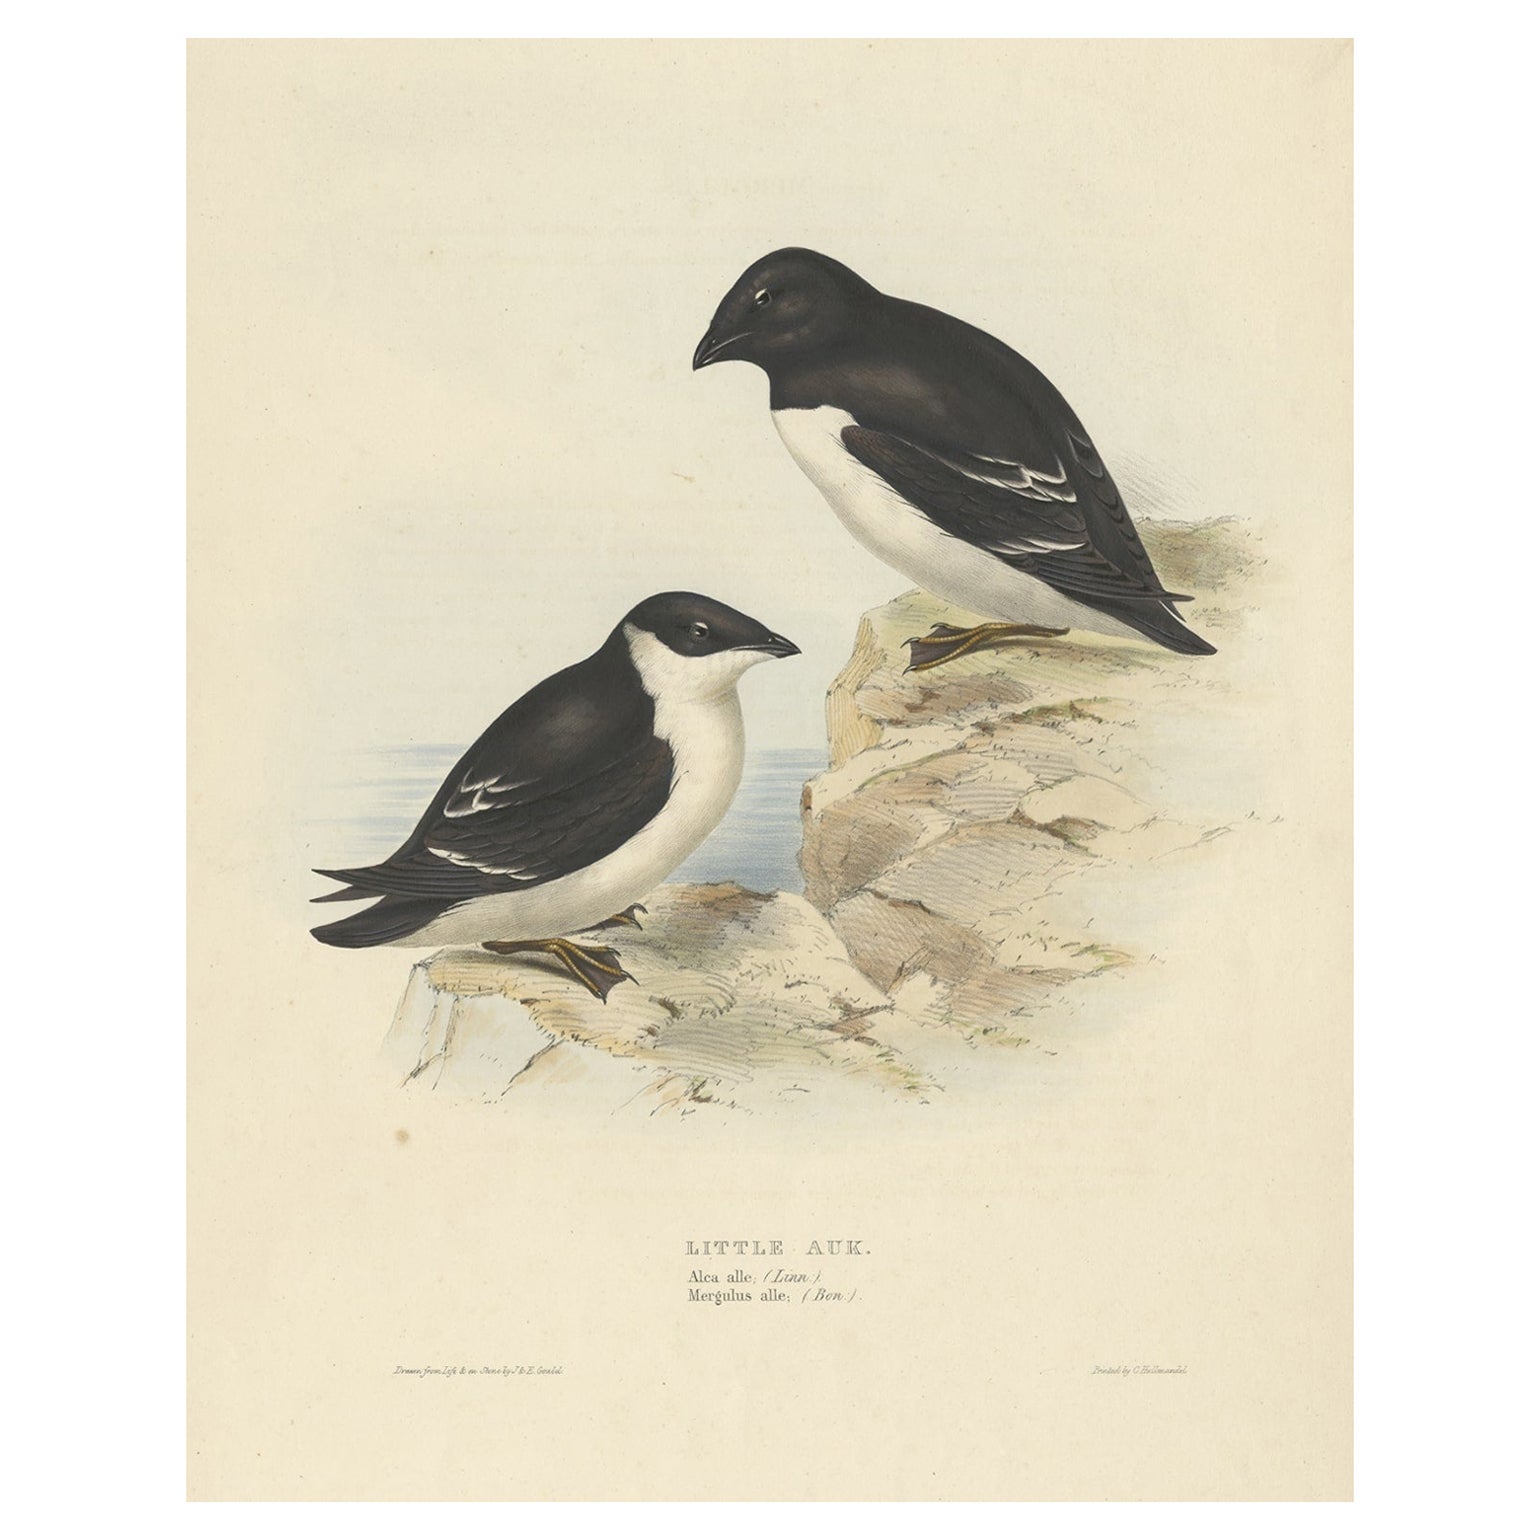 Old Bird Print Depicting the Little Auk by Gould, 1832